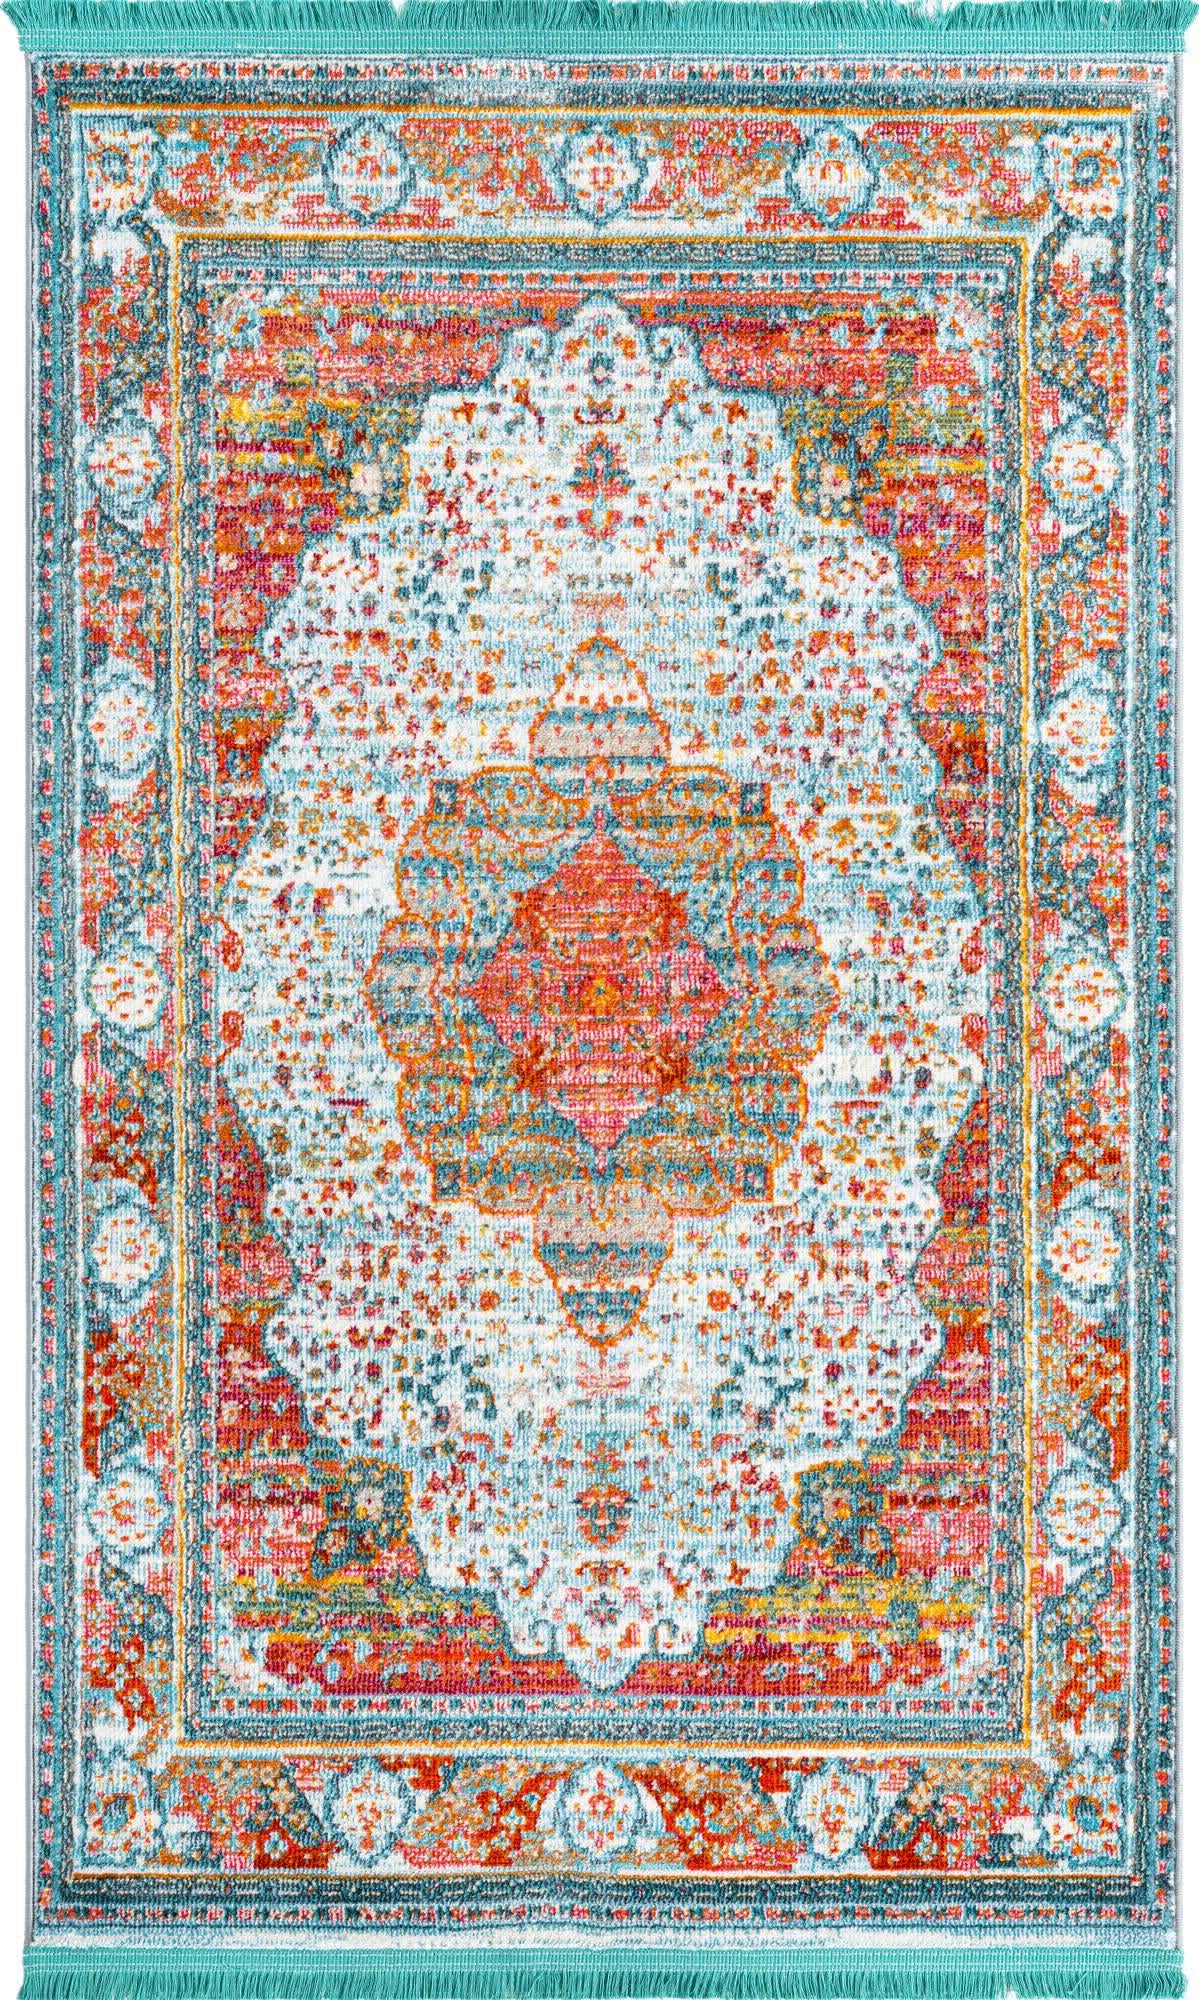 Unique Loom Baracoa T-F509 Pink Area Rug – Incredible Rugs and Decor